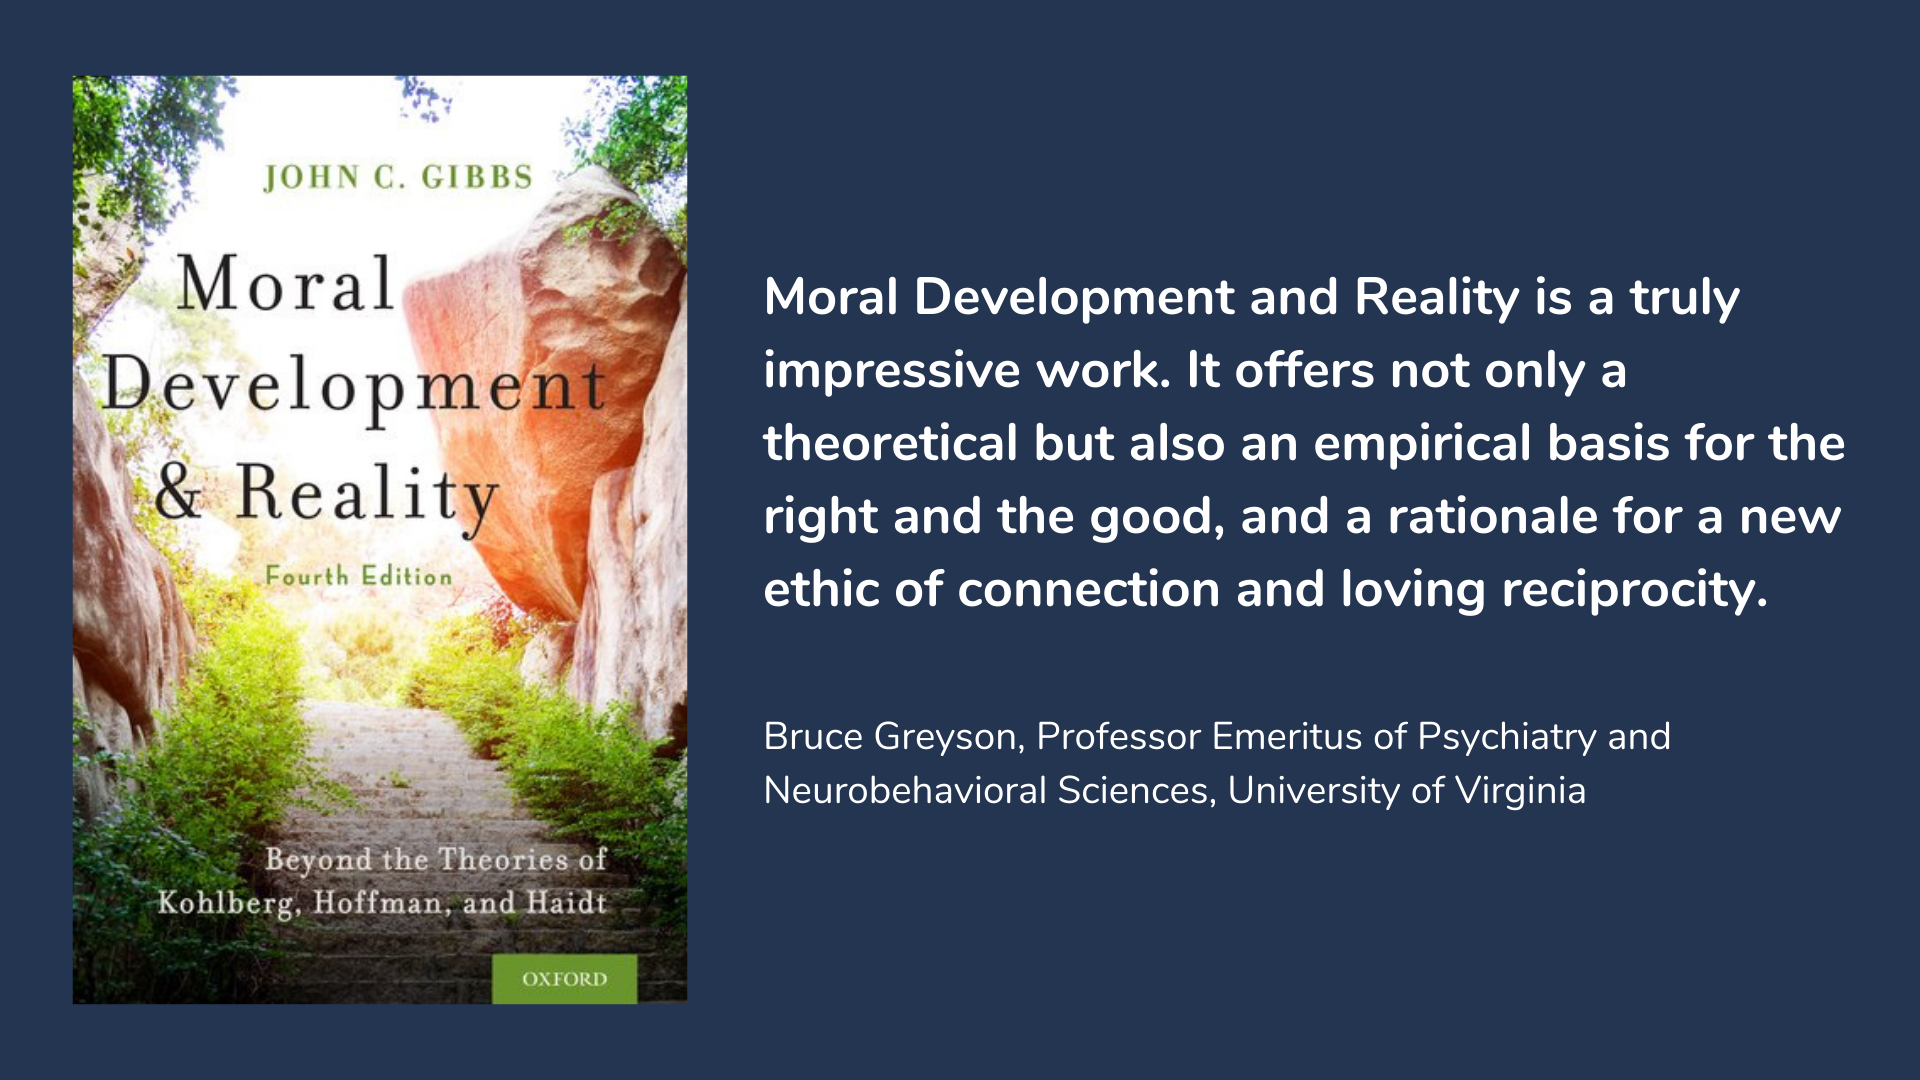 Moral Development and Reality, book cover and description